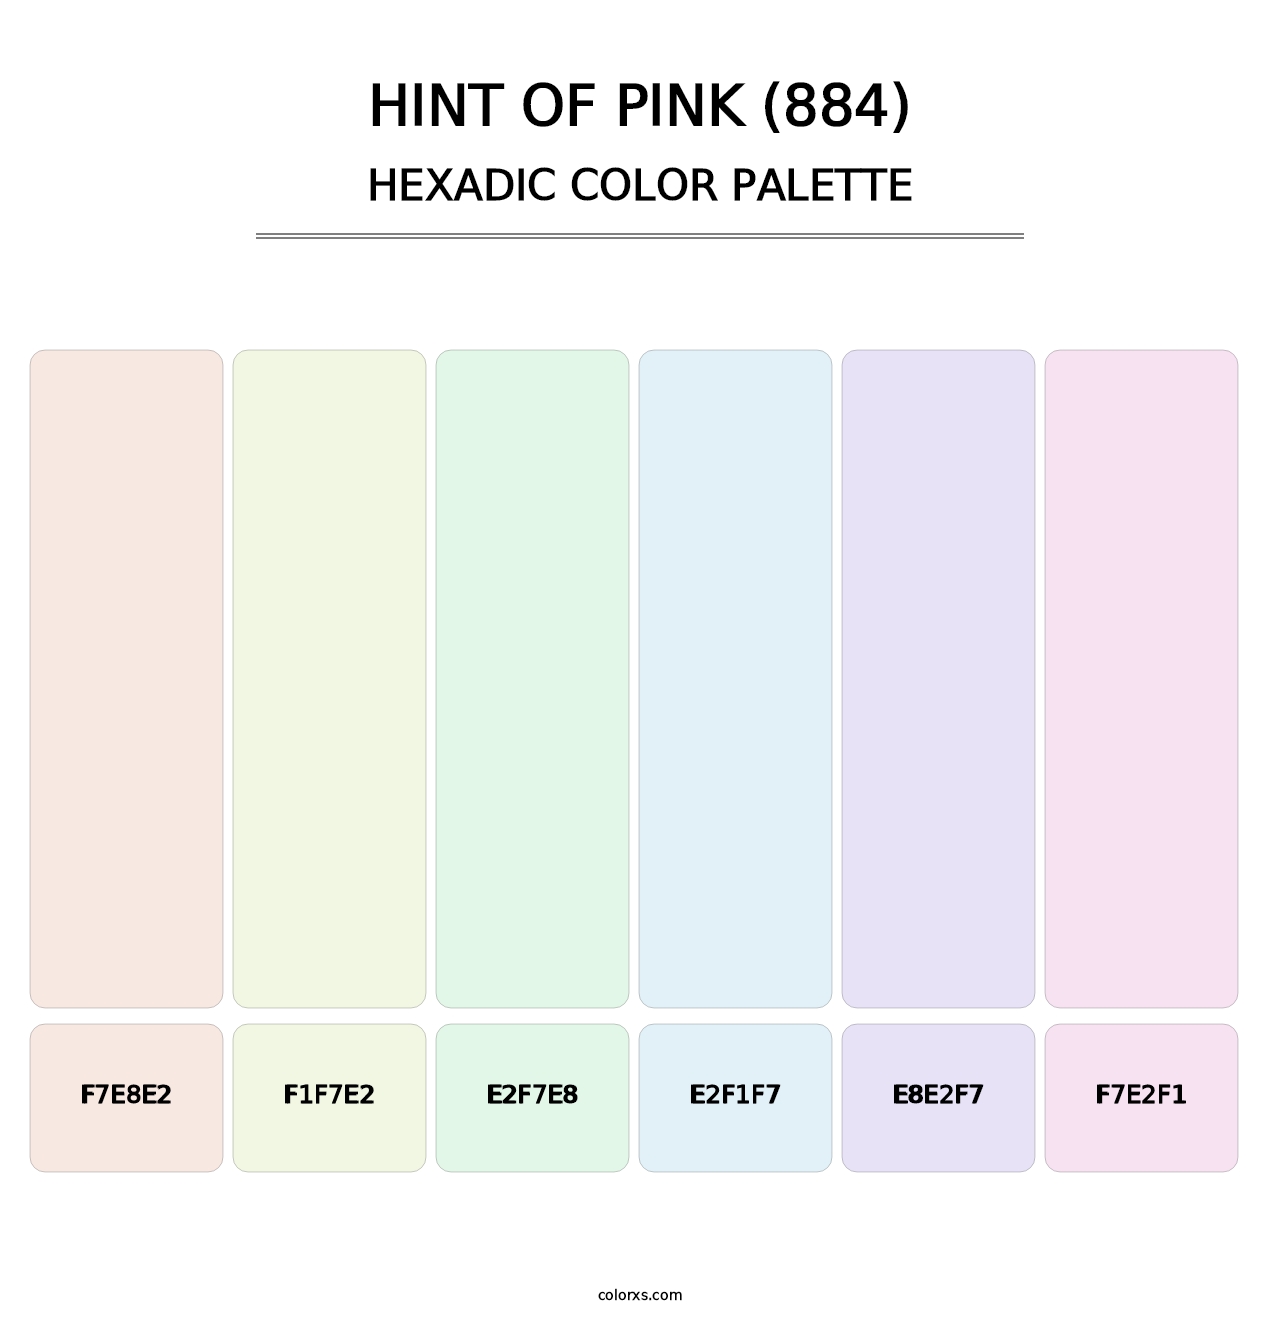 Hint of Pink (884) - Hexadic Color Palette